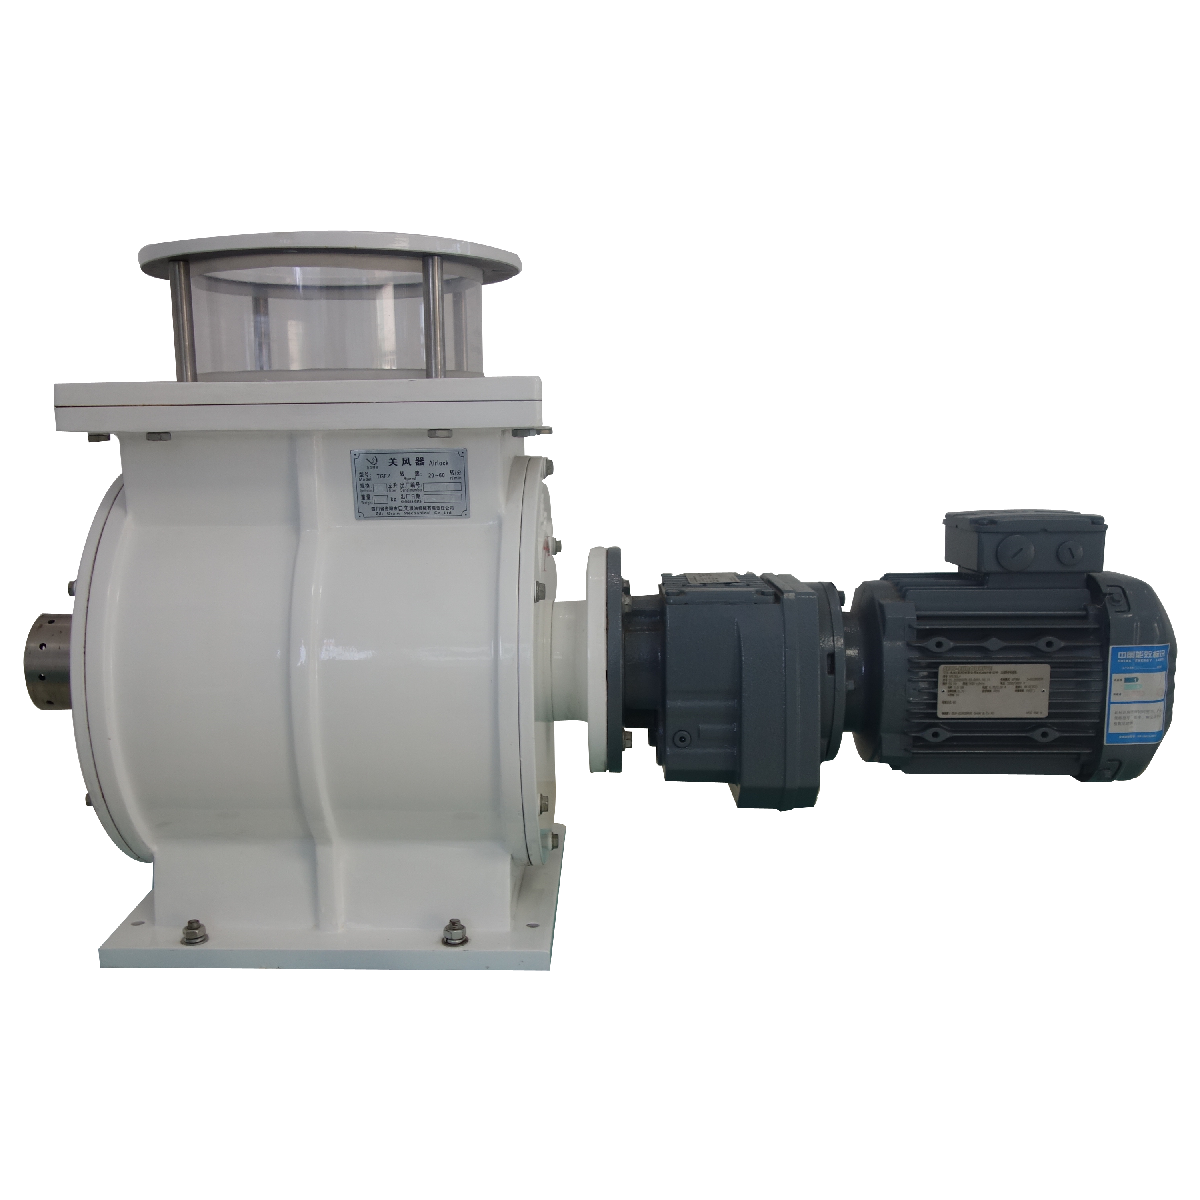 How a rotary airlock valve work in the pneumatic conveying system ?